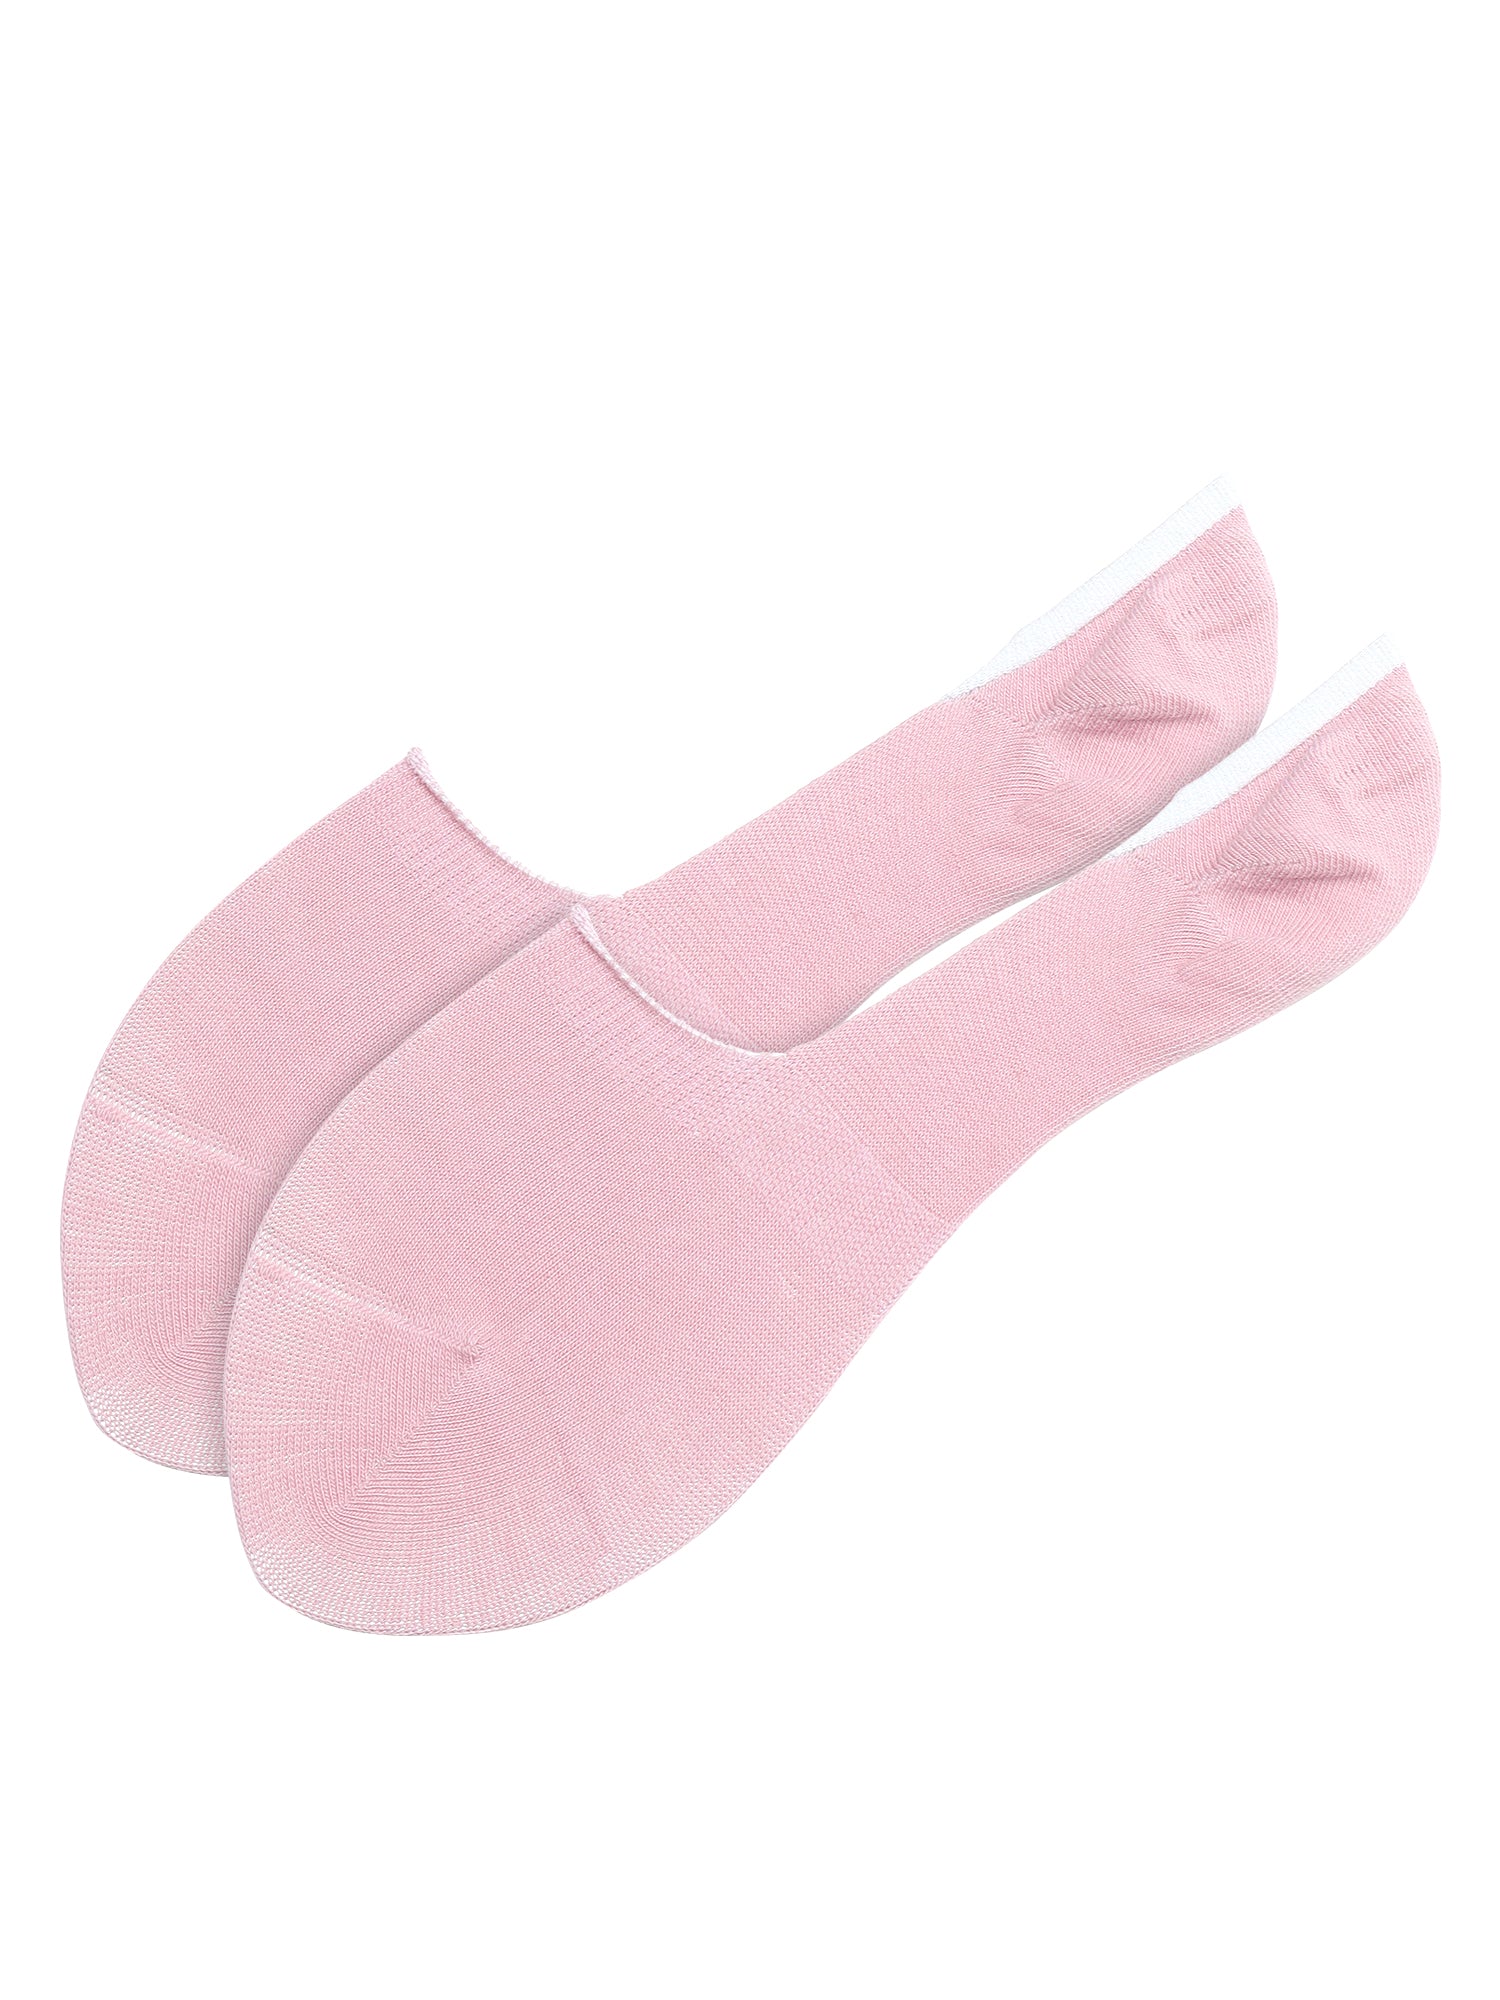 Pink Solid Non-Slip No Show Socks For Women